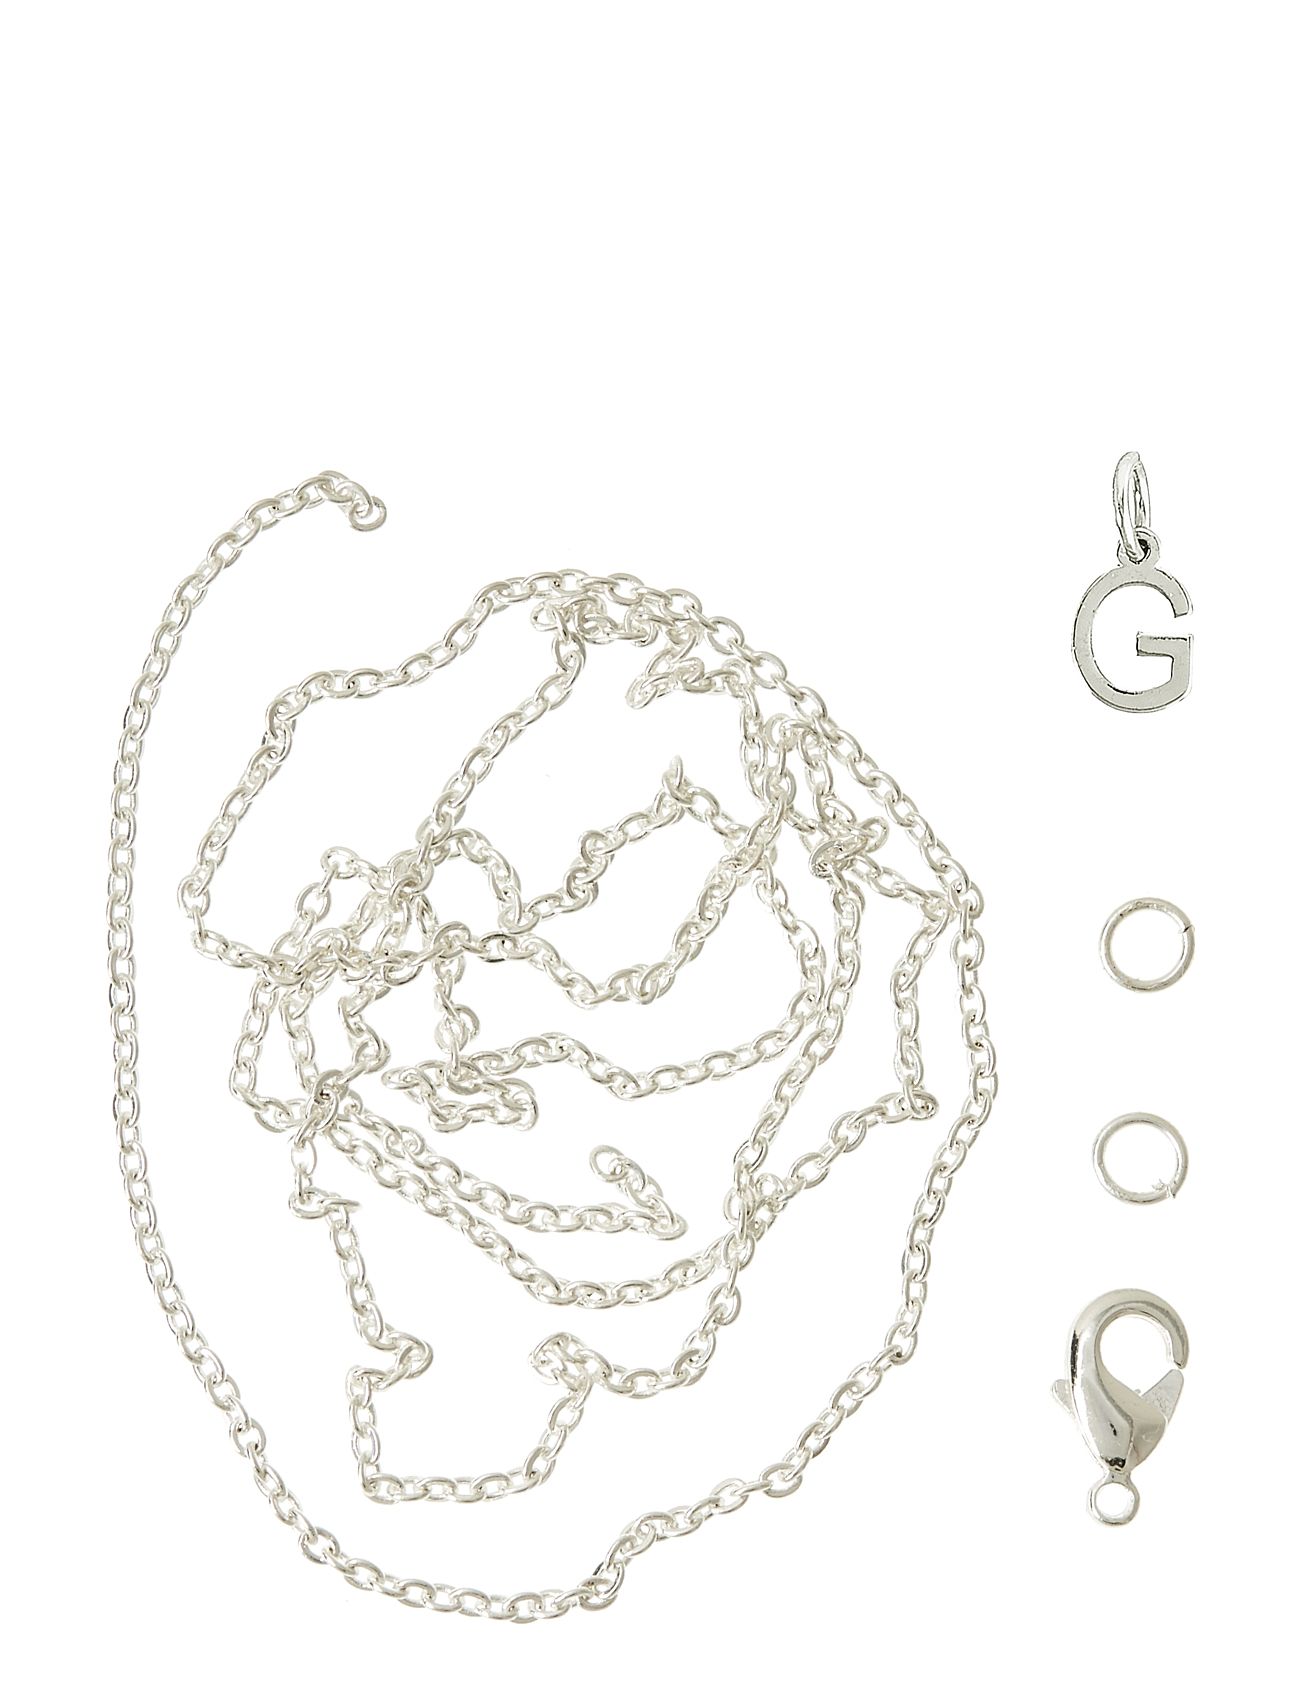 Letter G Sp With O-Ring, Chain And Clasp Toys Creativity Drawing & Crafts Craft Jewellery & Accessories Silver Me & My Box